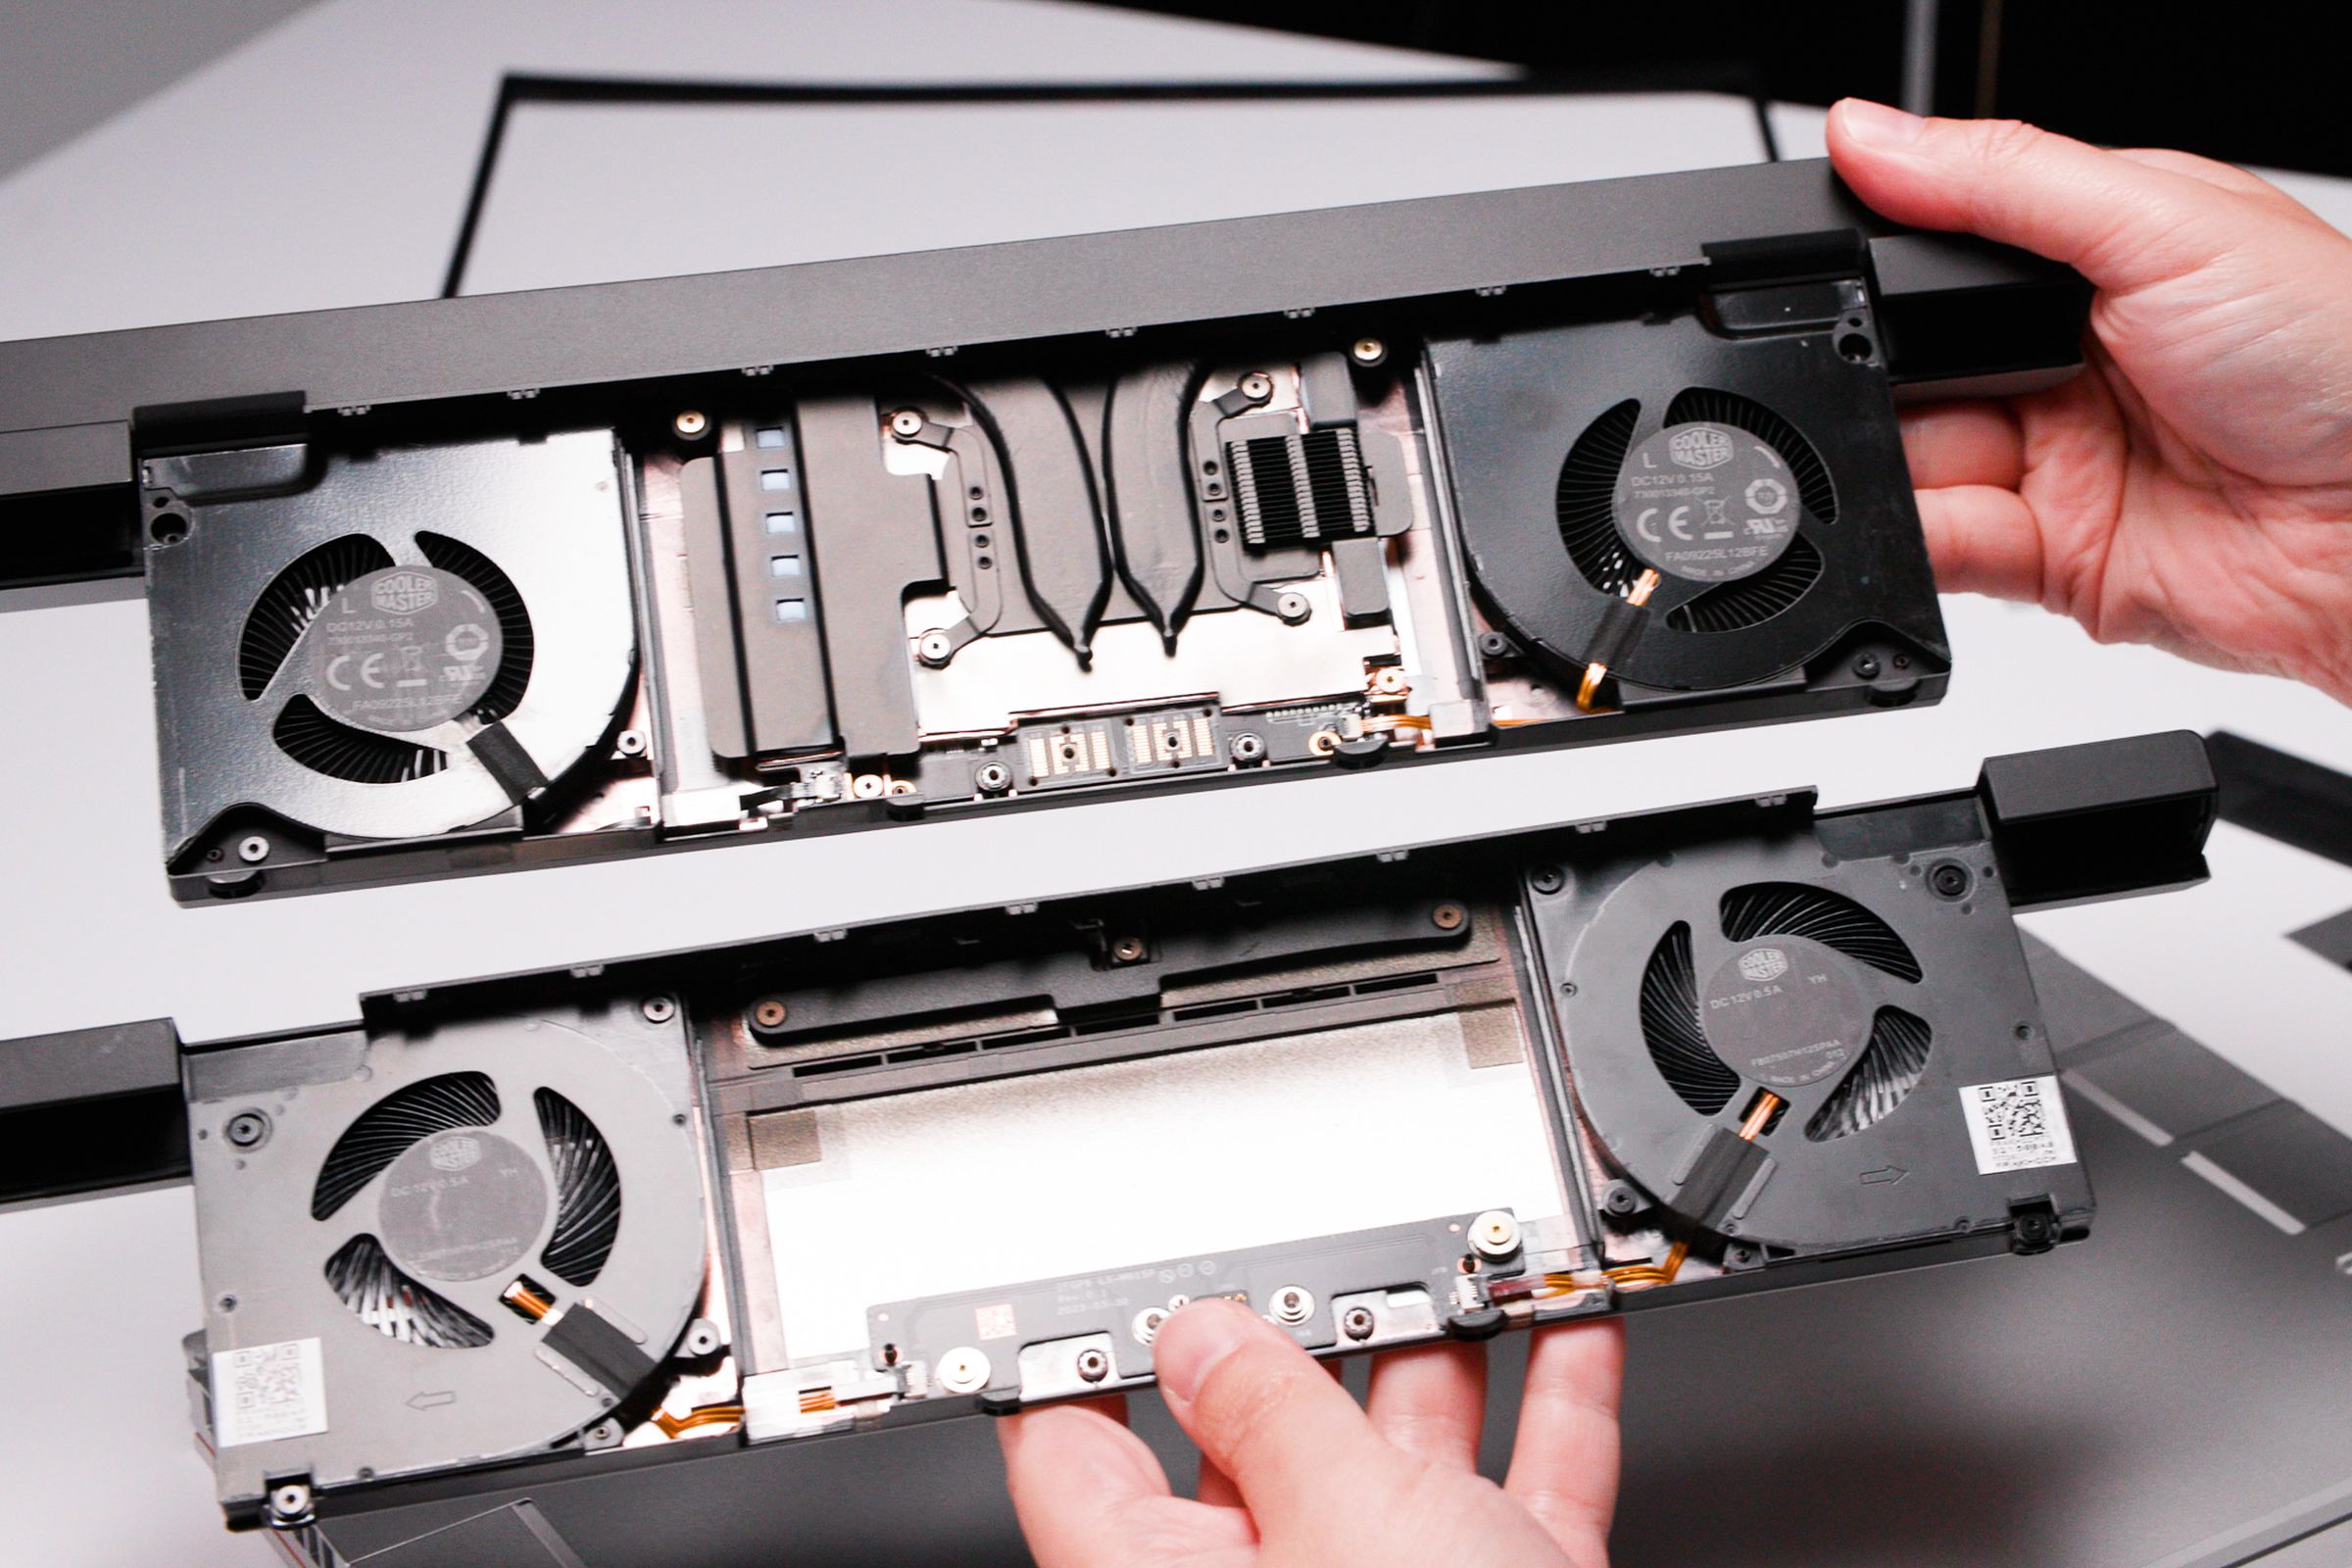 The modular GPU (above)  vs. the default Expansion Bay Shell (below).